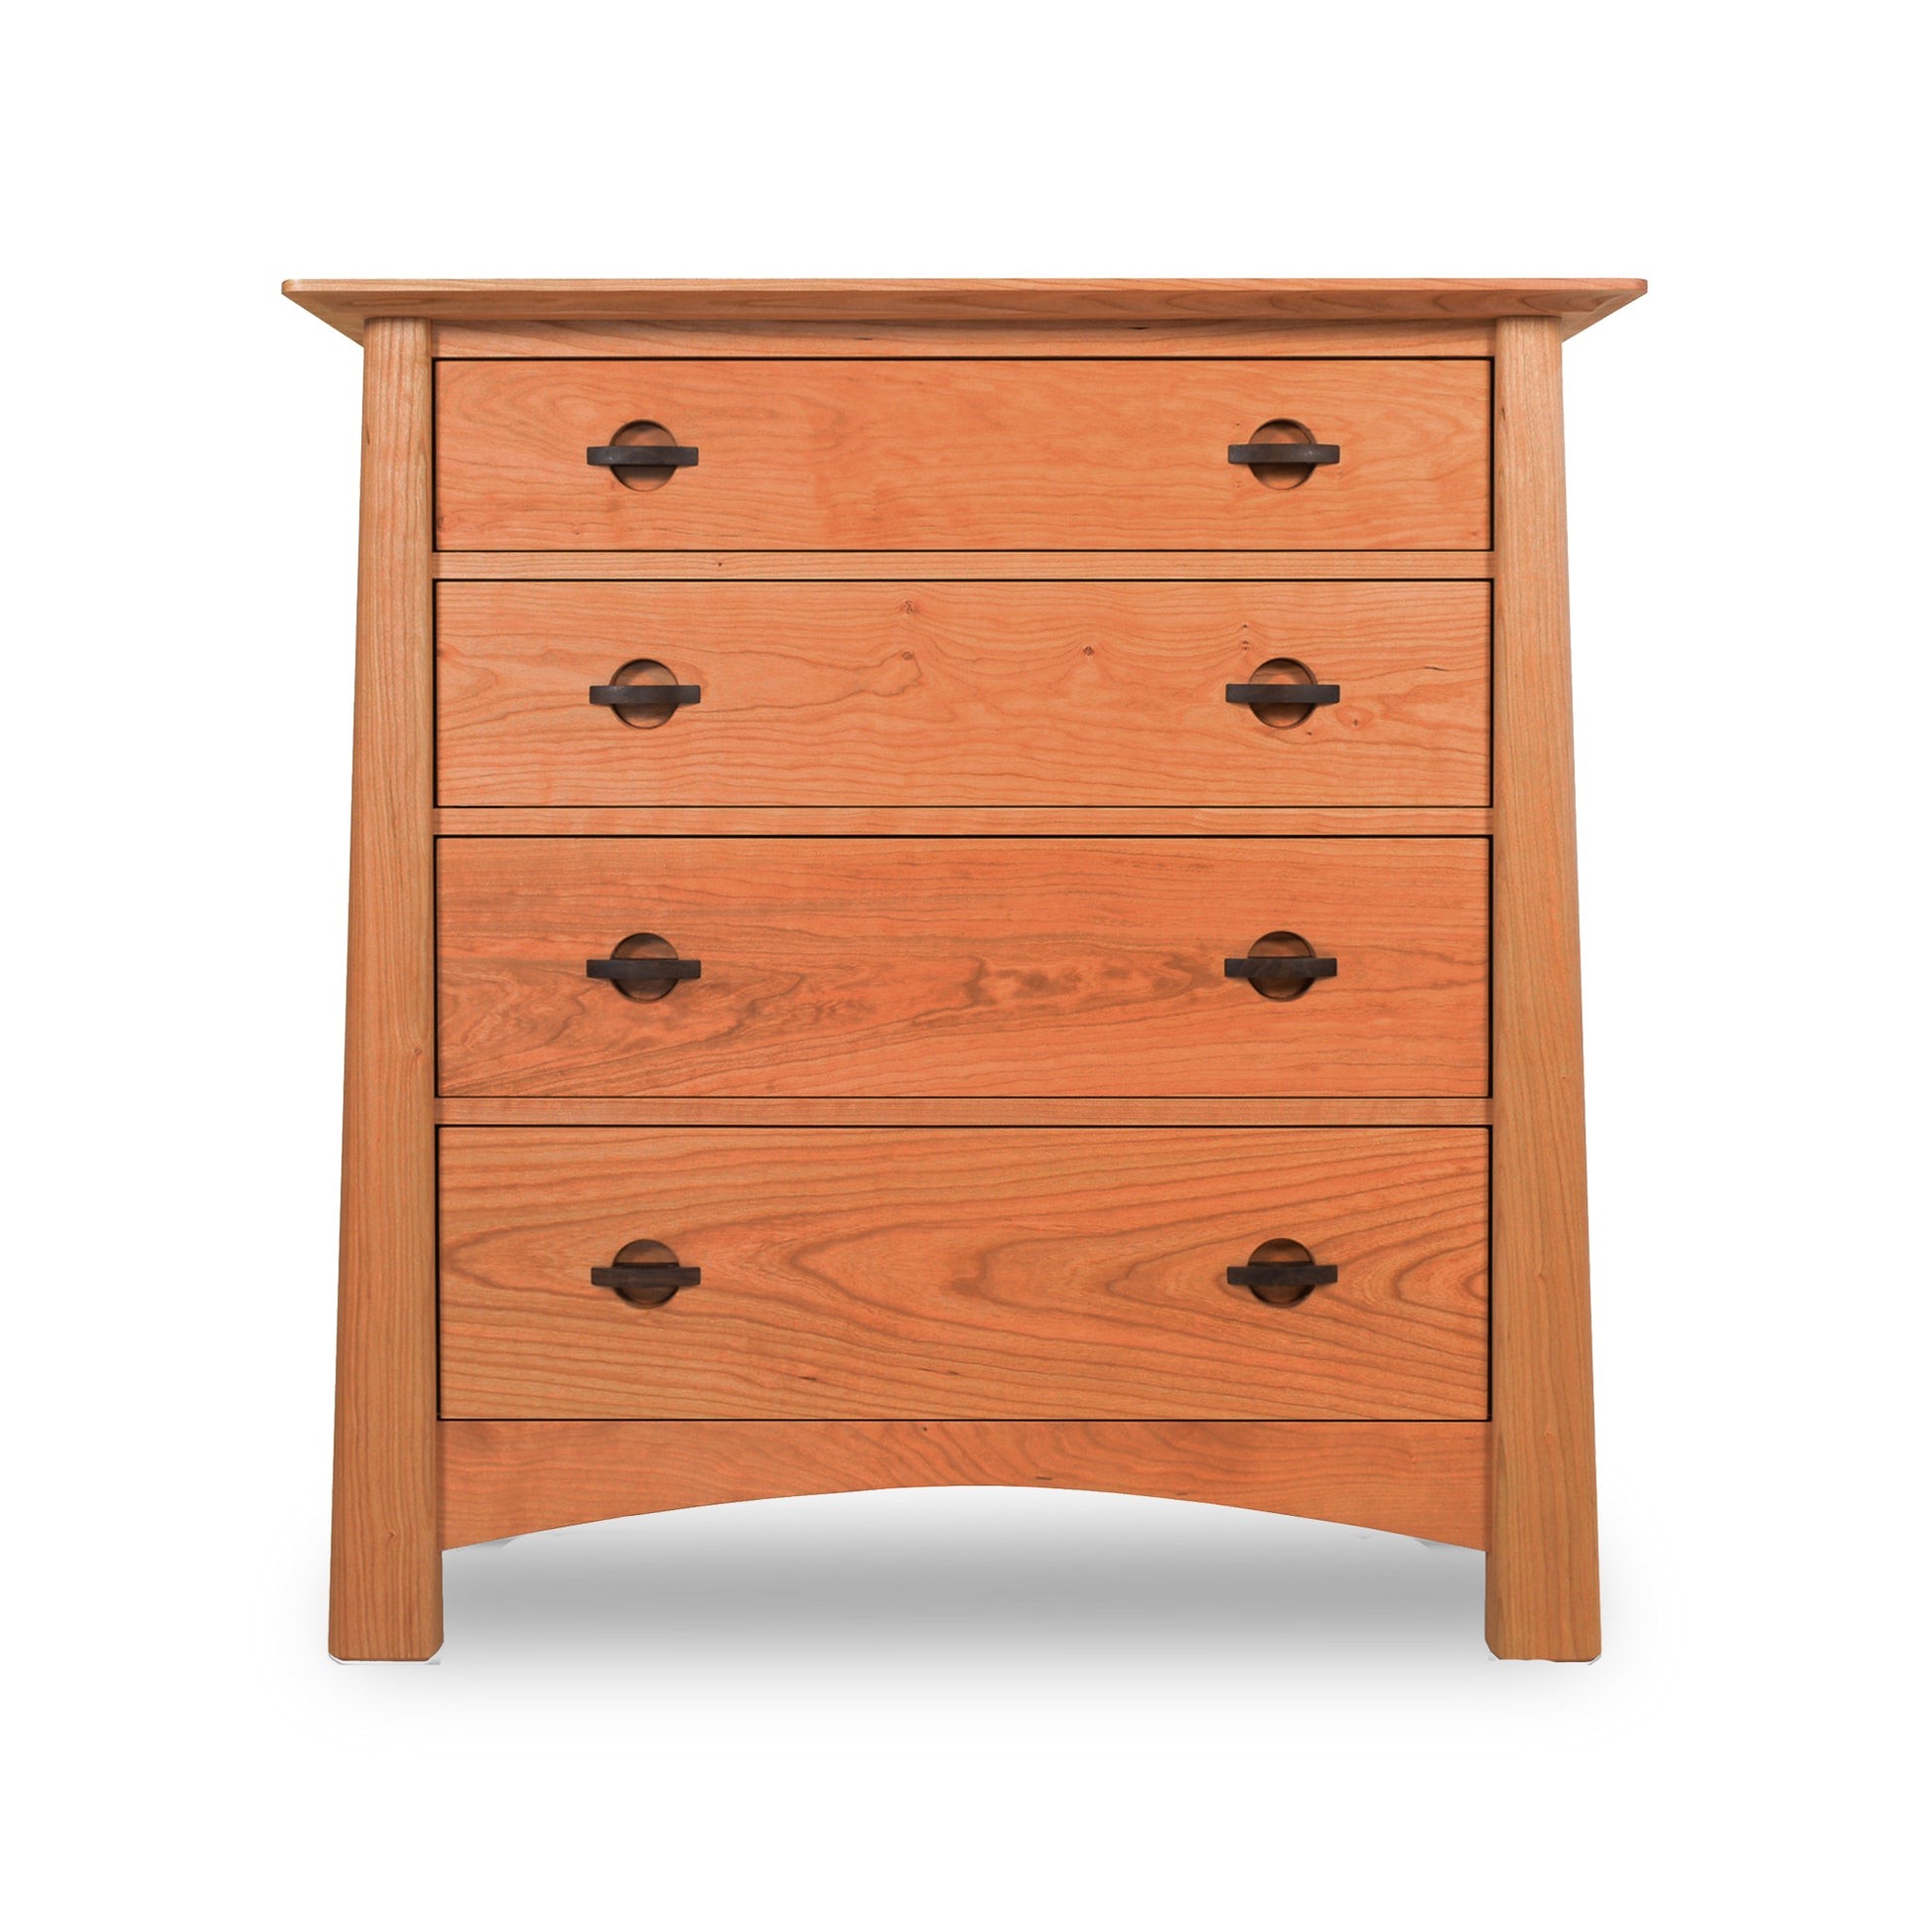 A Cherry Moon 4-Drawer Chest in craftsman style with a smooth finish and round knobs, isolated on a white background, crafted by Maple Corner Woodworks.